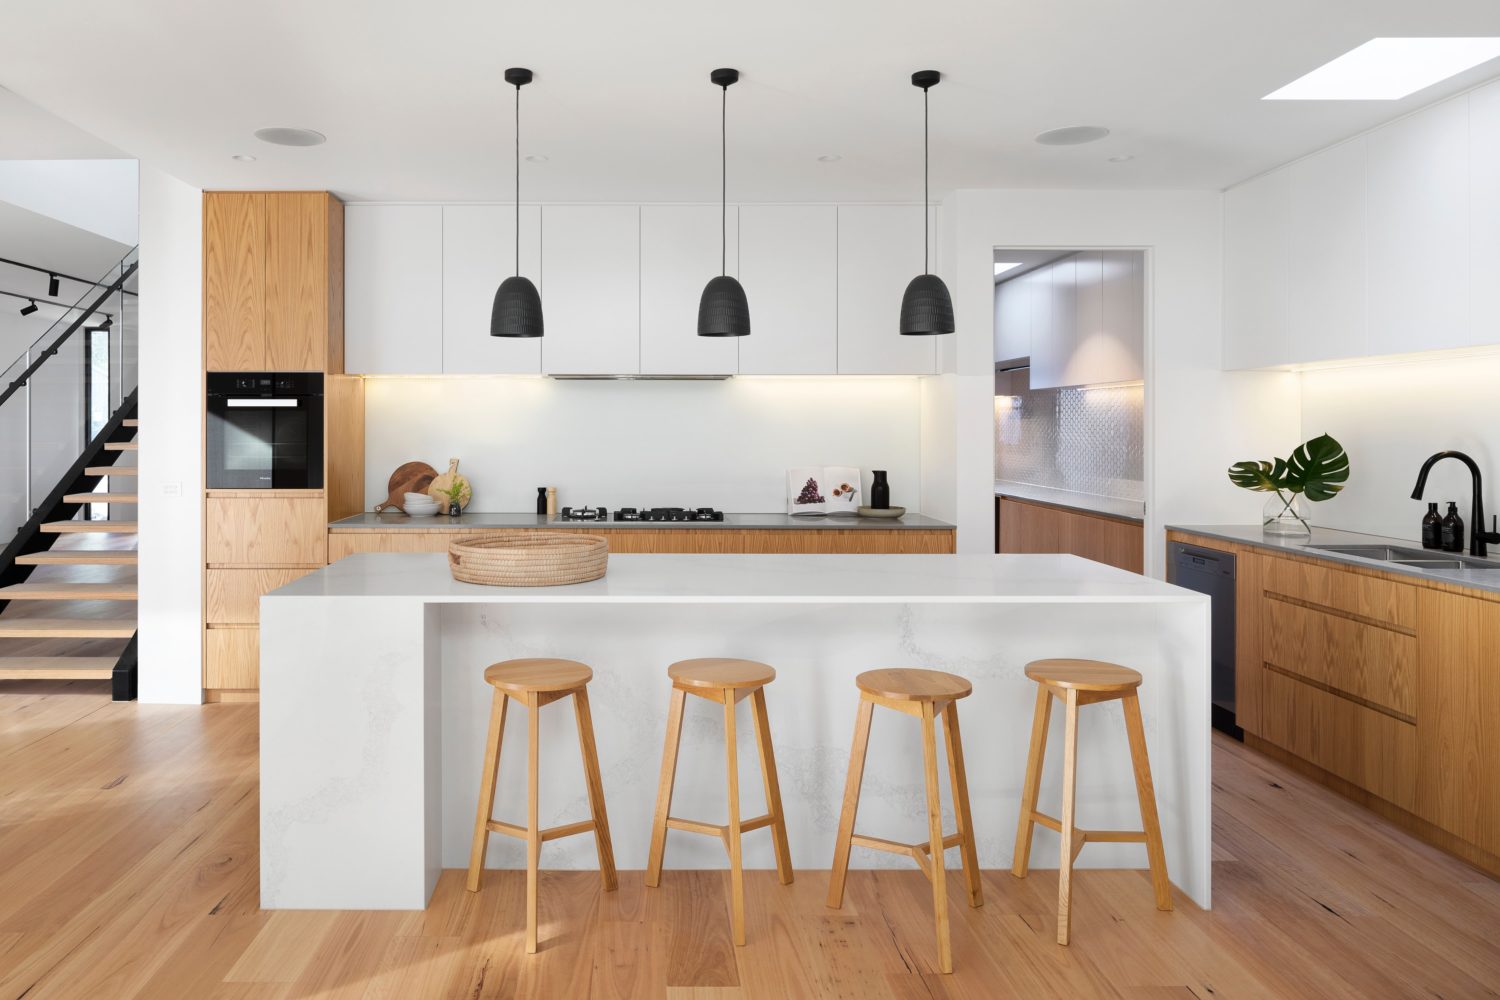 White Cabinets, What Is The Best White Countertop